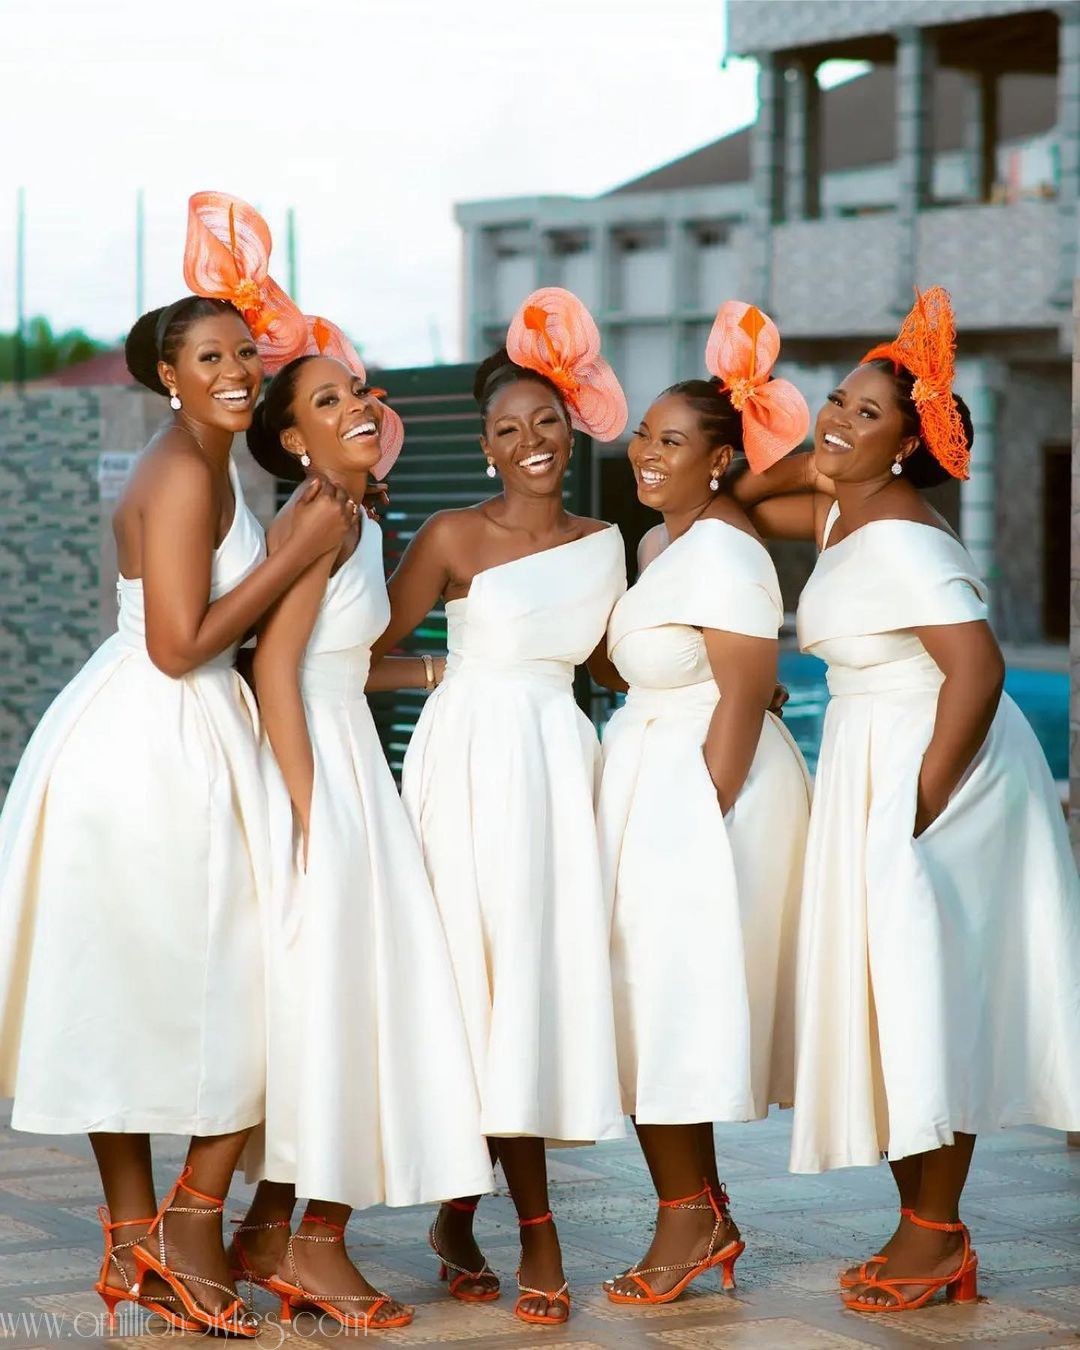 6 Trendy Bridesmaid Styles to Consider for Your Wedding